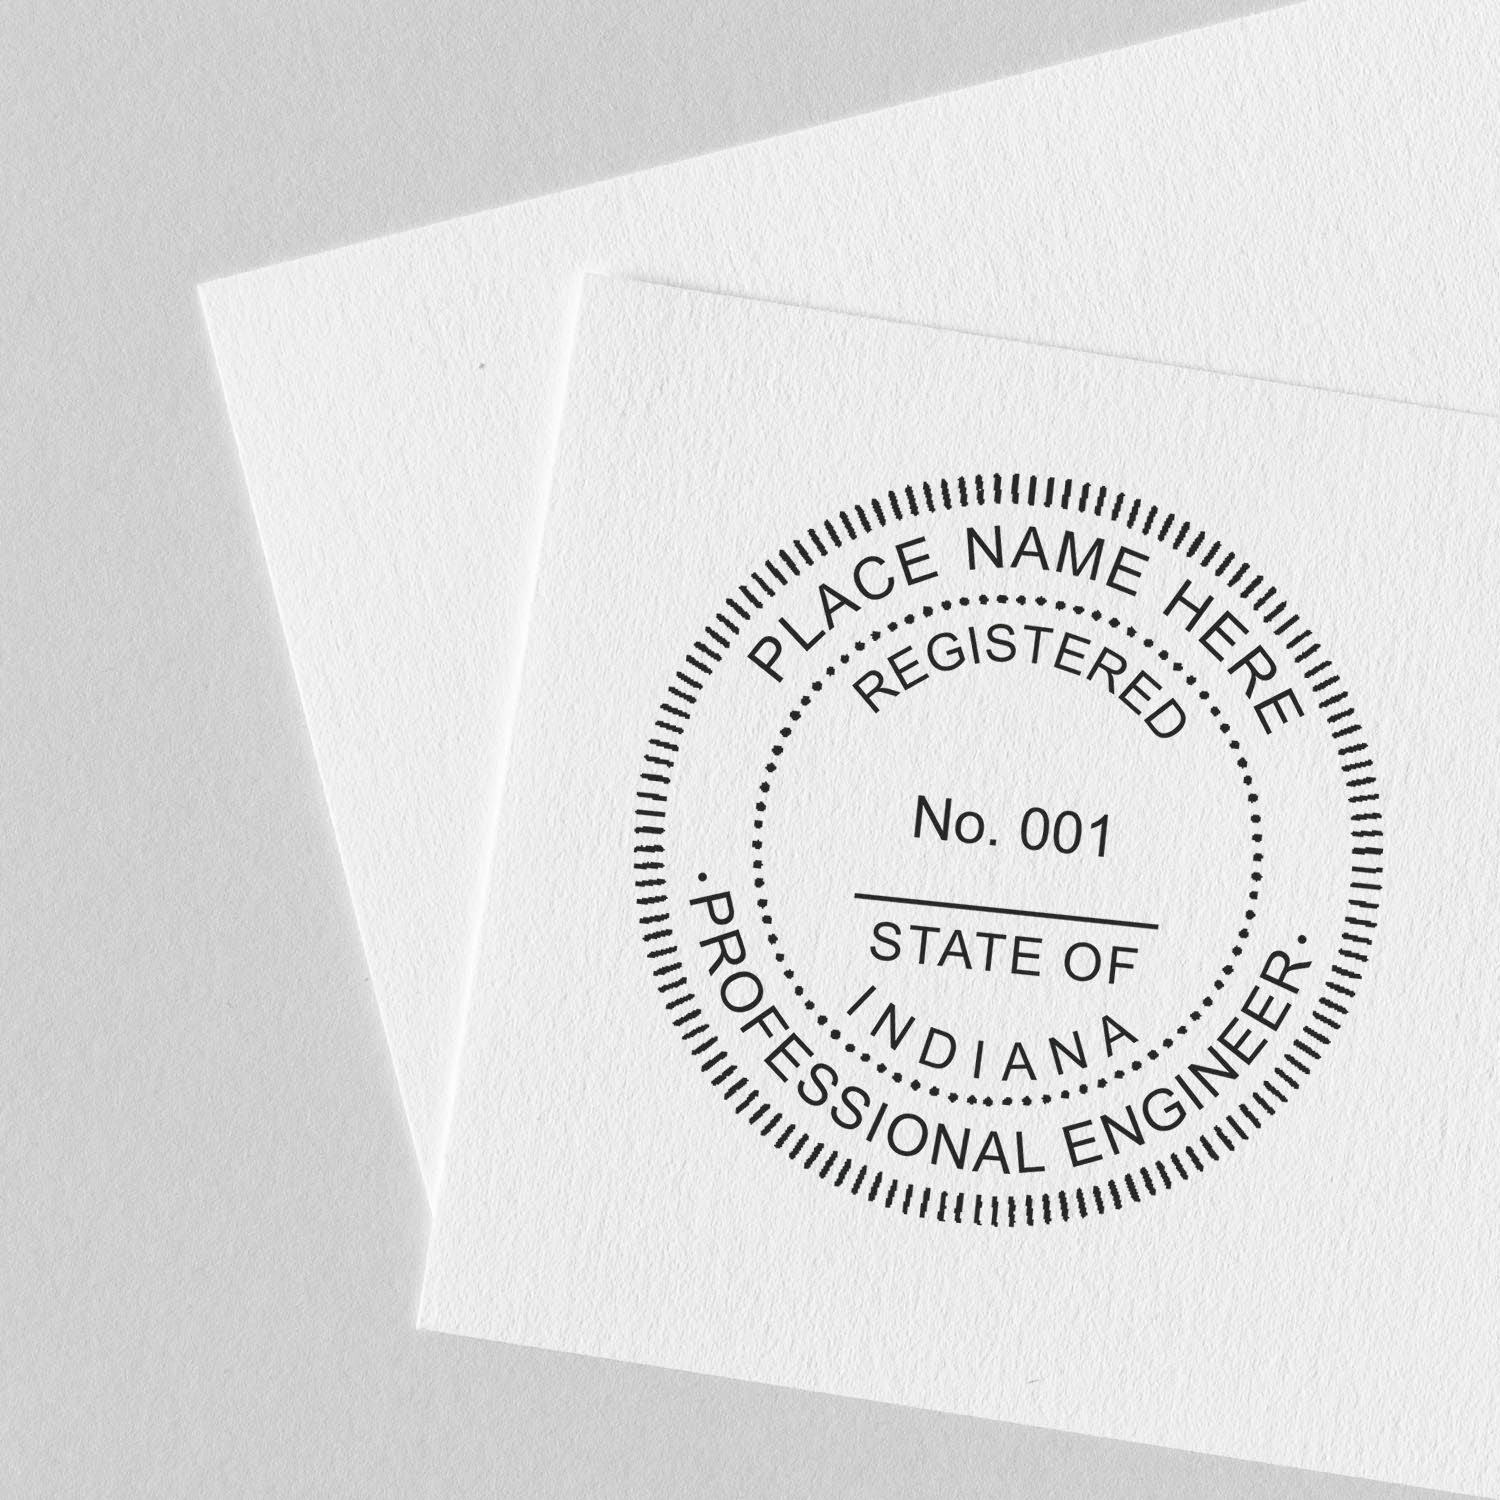 The main image for the Slim Pre-Inked Indiana Professional Engineer Seal Stamp depicting a sample of the imprint and electronic files